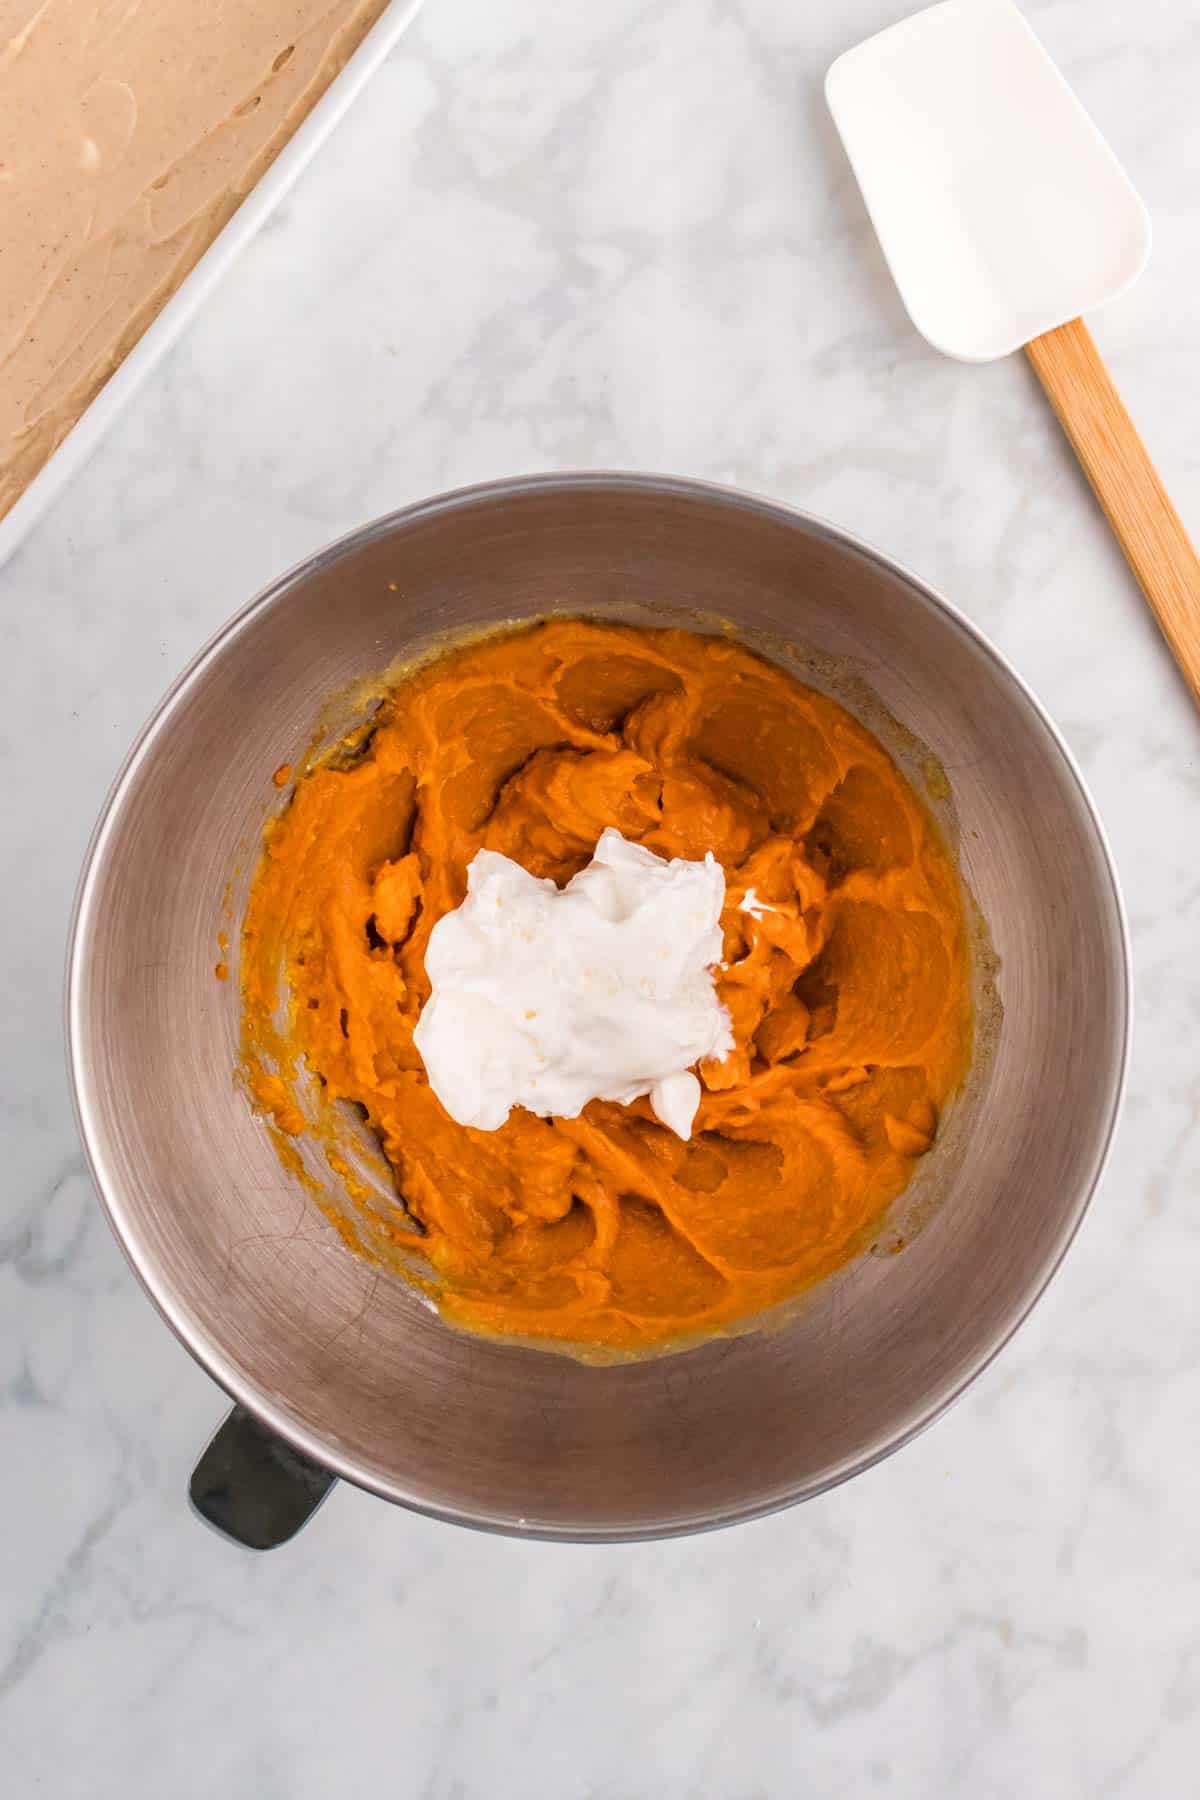 Cool Whip added to mixing bowl with pumpkin pudding mixture